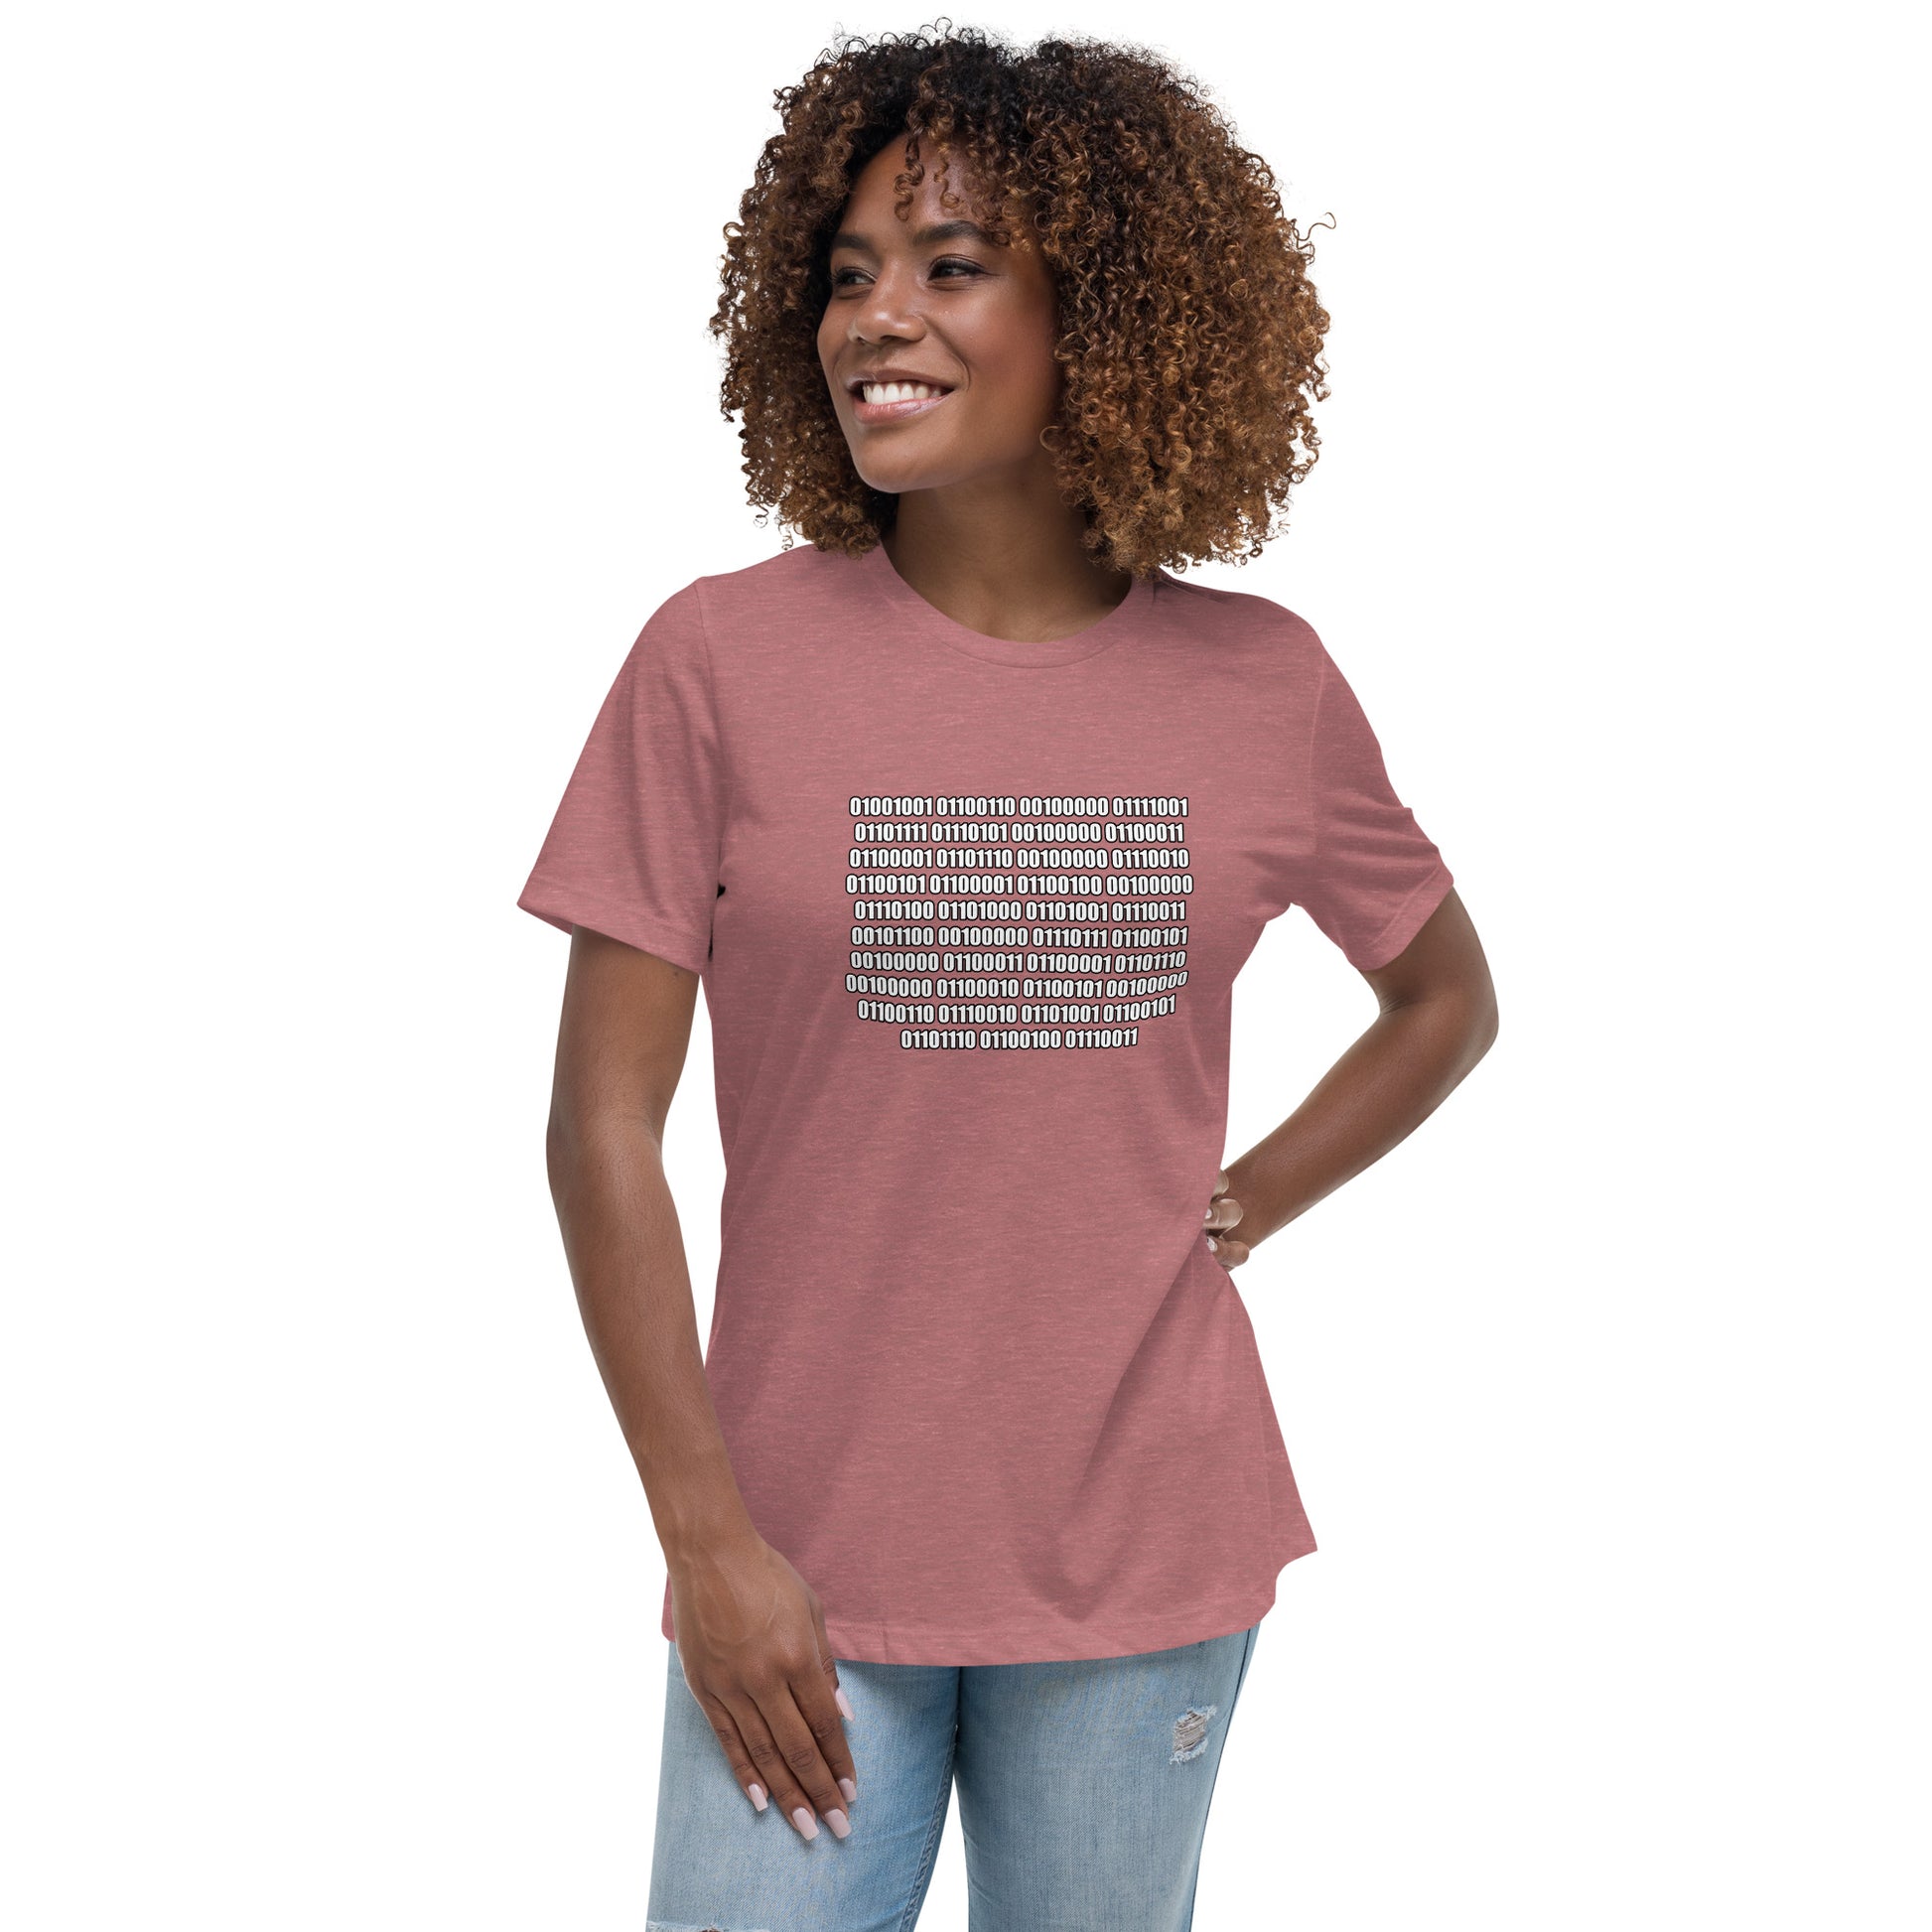 Woman with mauve t-shirt with binary code "If you can read this"